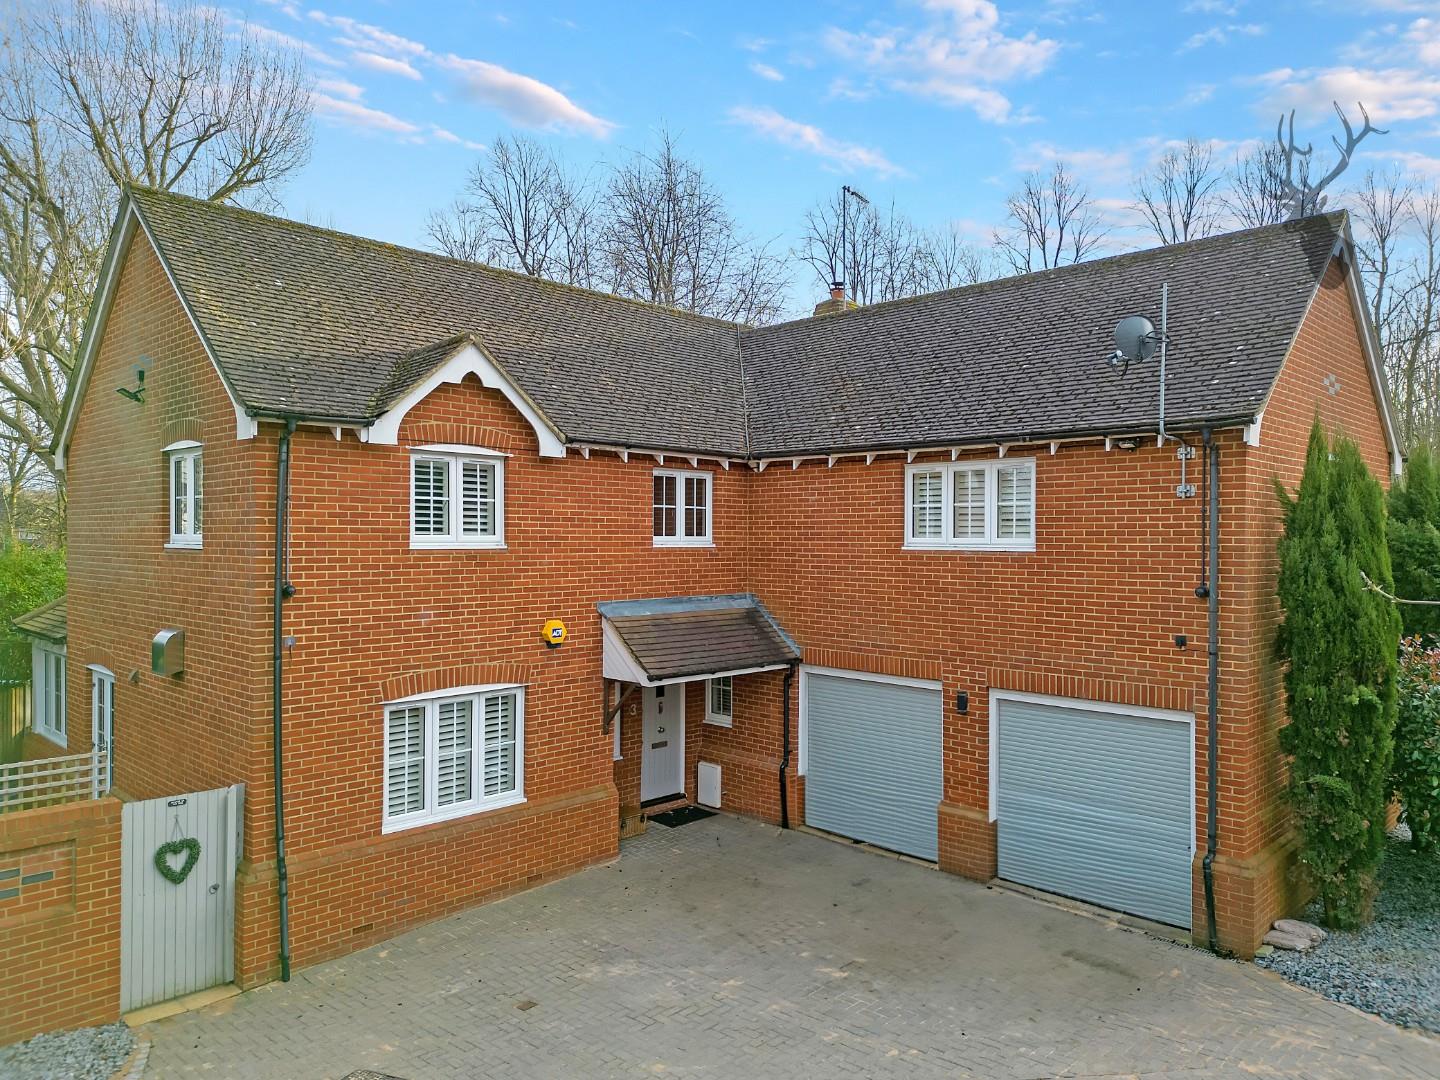 Similar Property: House - Detached in North Weald